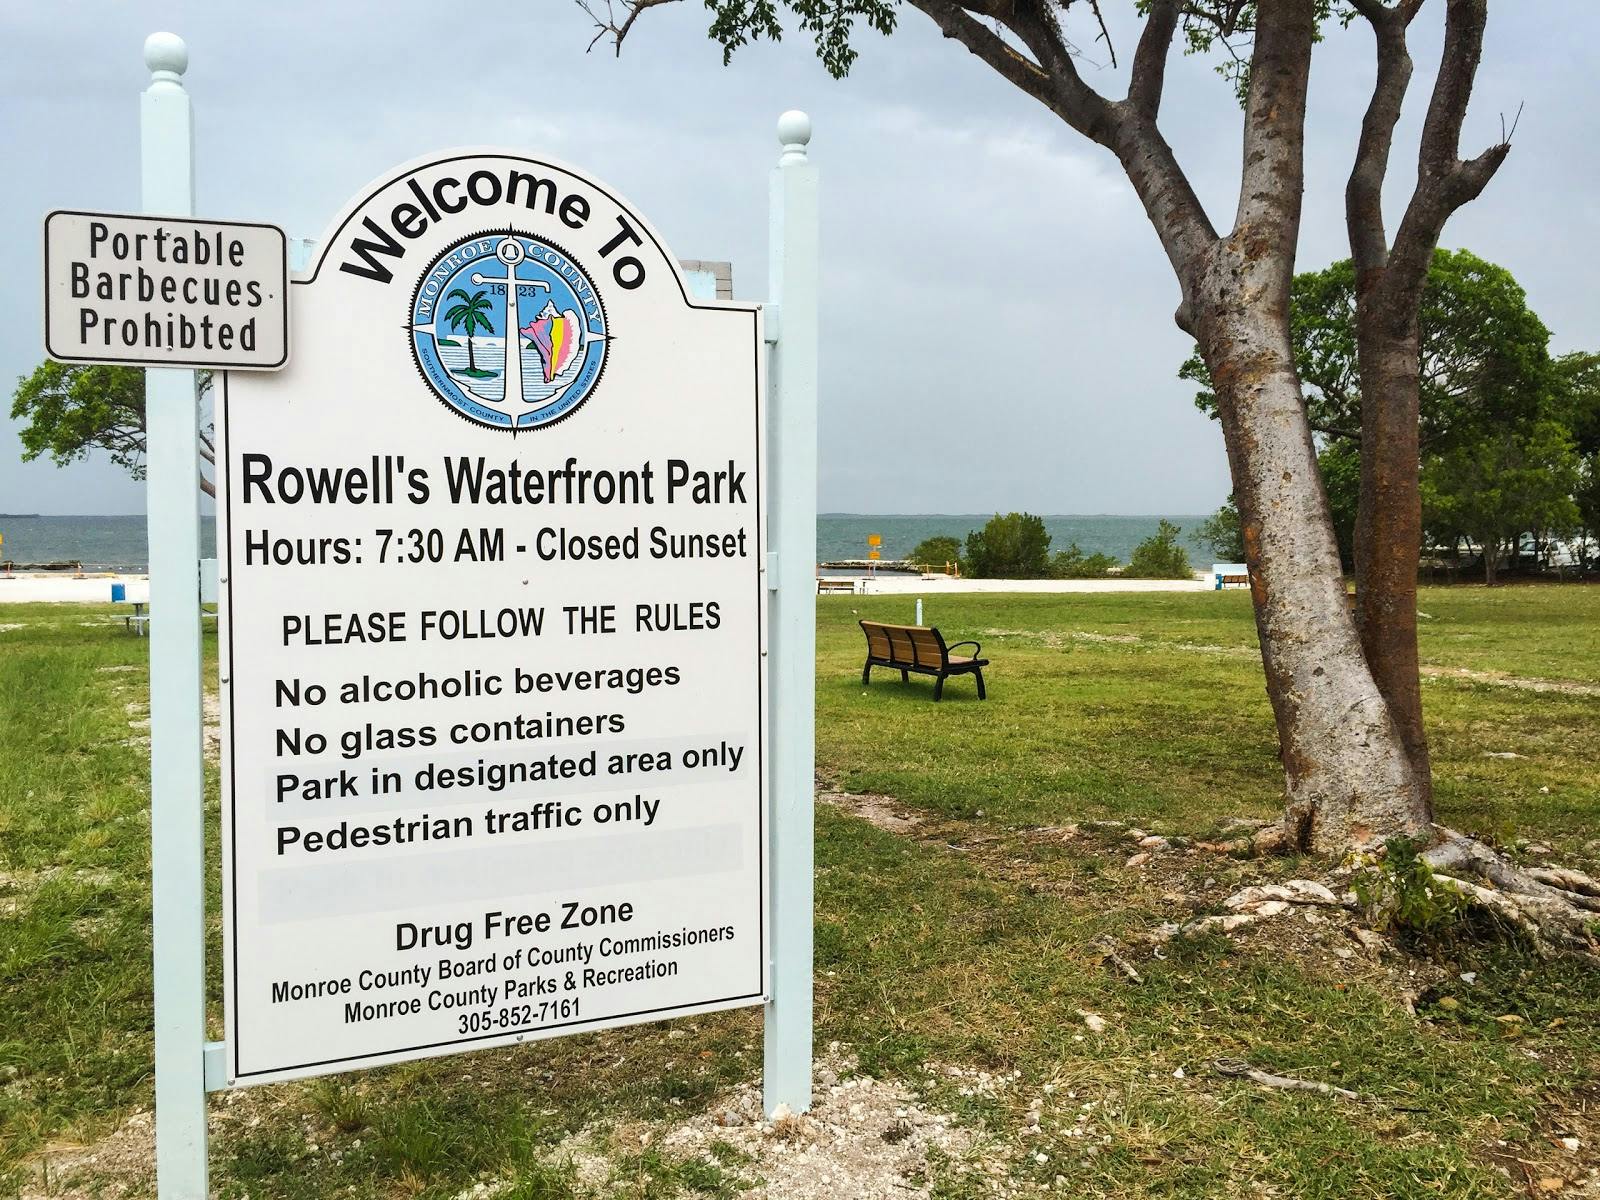 Image - Rowell's Waterfront Park